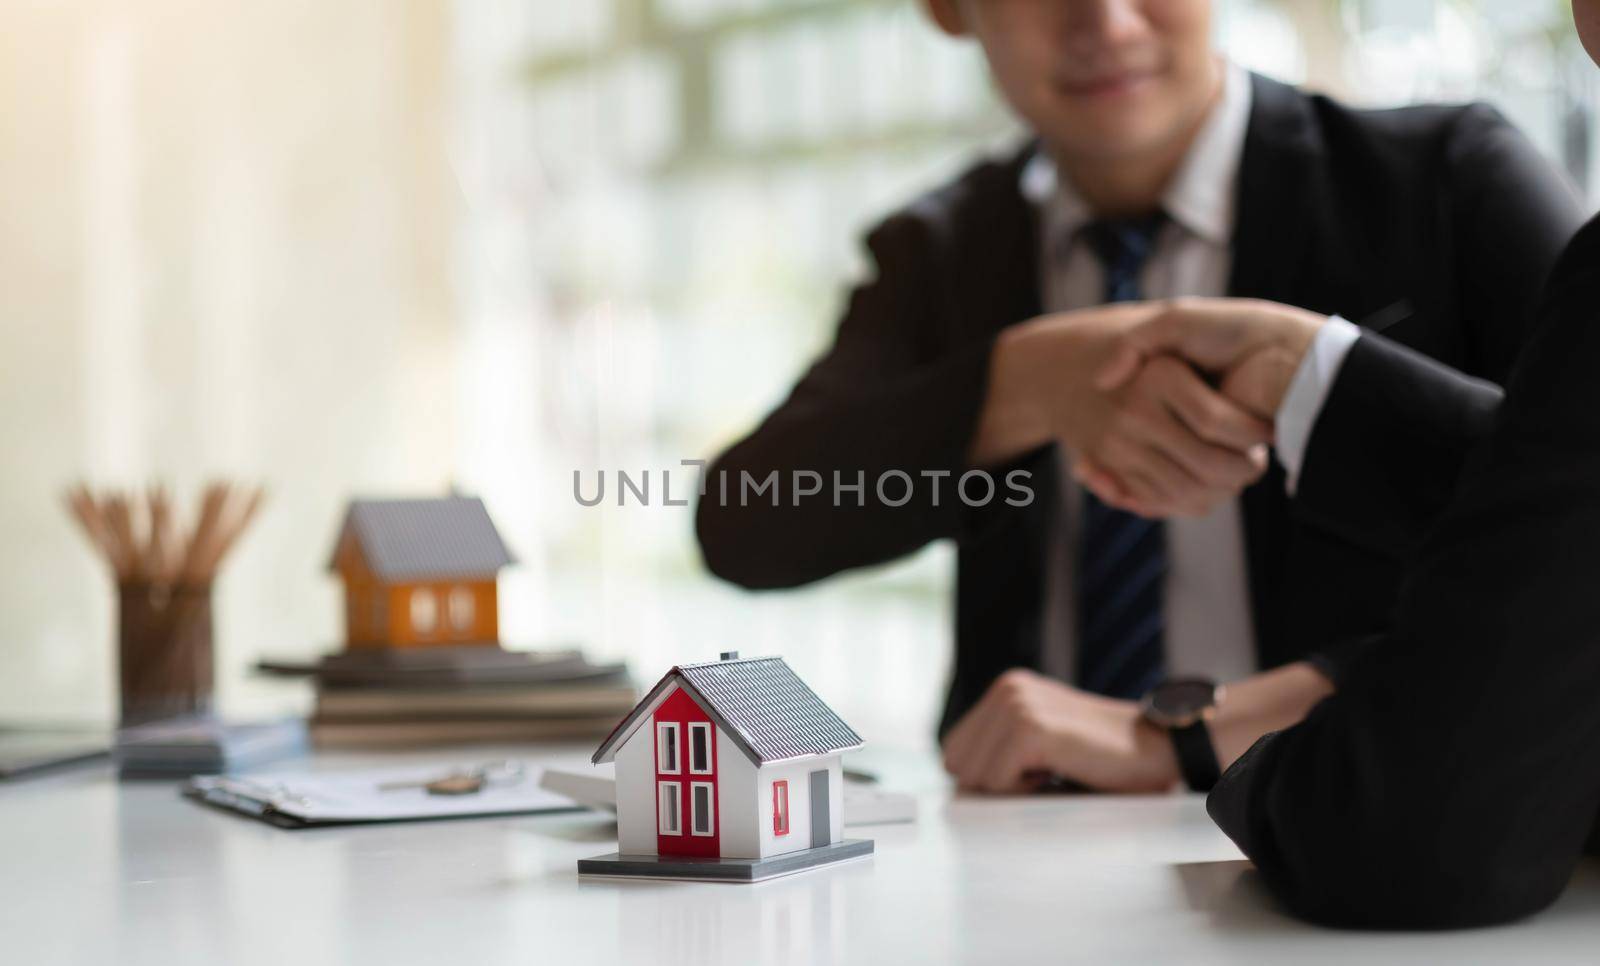 Estate agent shaking hands with his customer after contract signature, Contract document and house model on wooden desk.